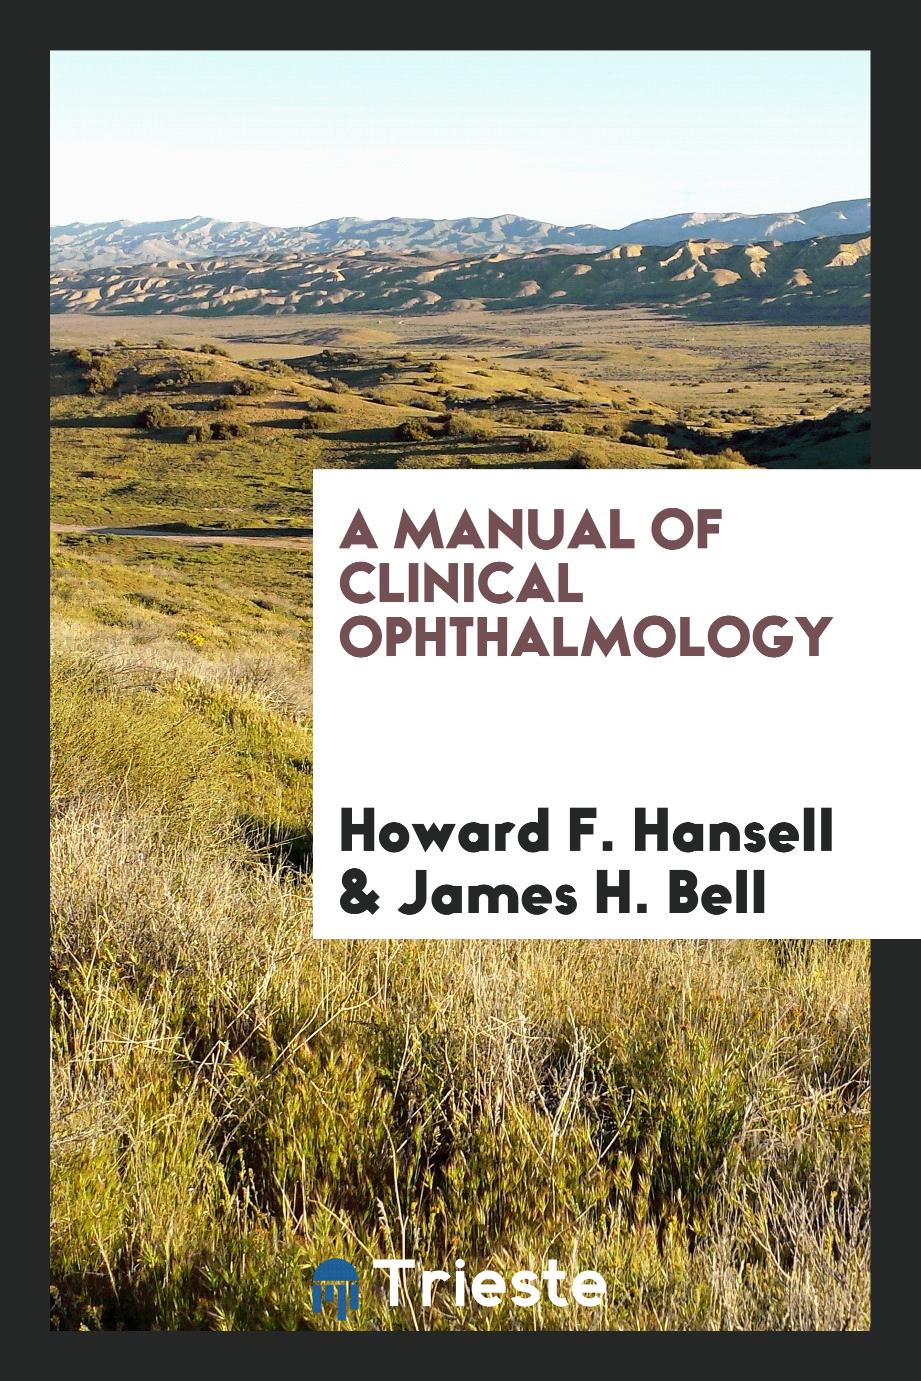 A manual of clinical ophthalmology